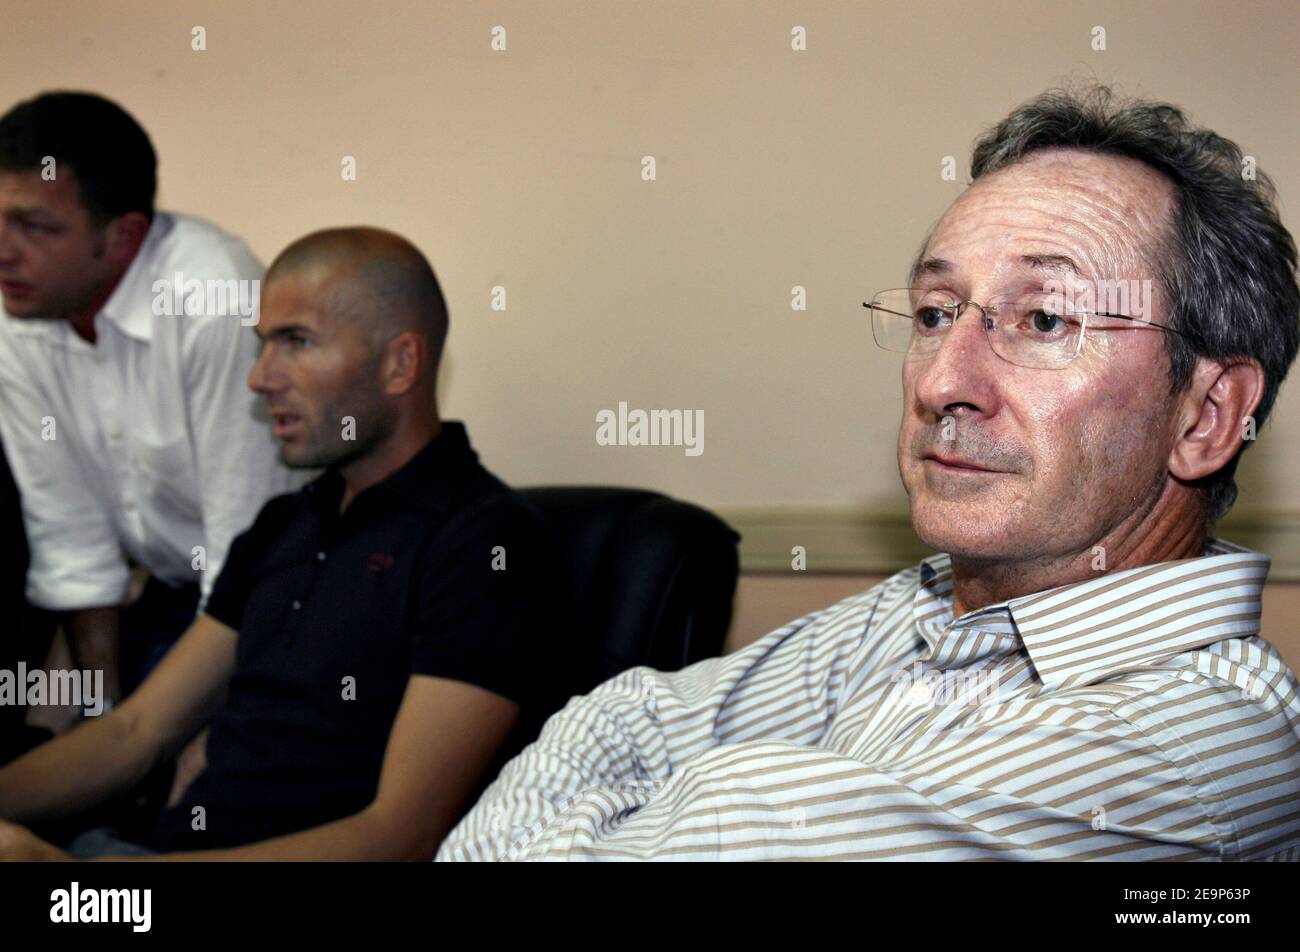 Danone CEO Franck Riboud and French football player Zinedine Zidane during a press conference Dhaka, Bangladesh on November 7, 2006. Zidane played with young Bangladeshi soccer players during his brief visit to the South Asian Nation. Photo by Patrick Durand/Cameleon/ABACAPRESS.COM Stock Photo